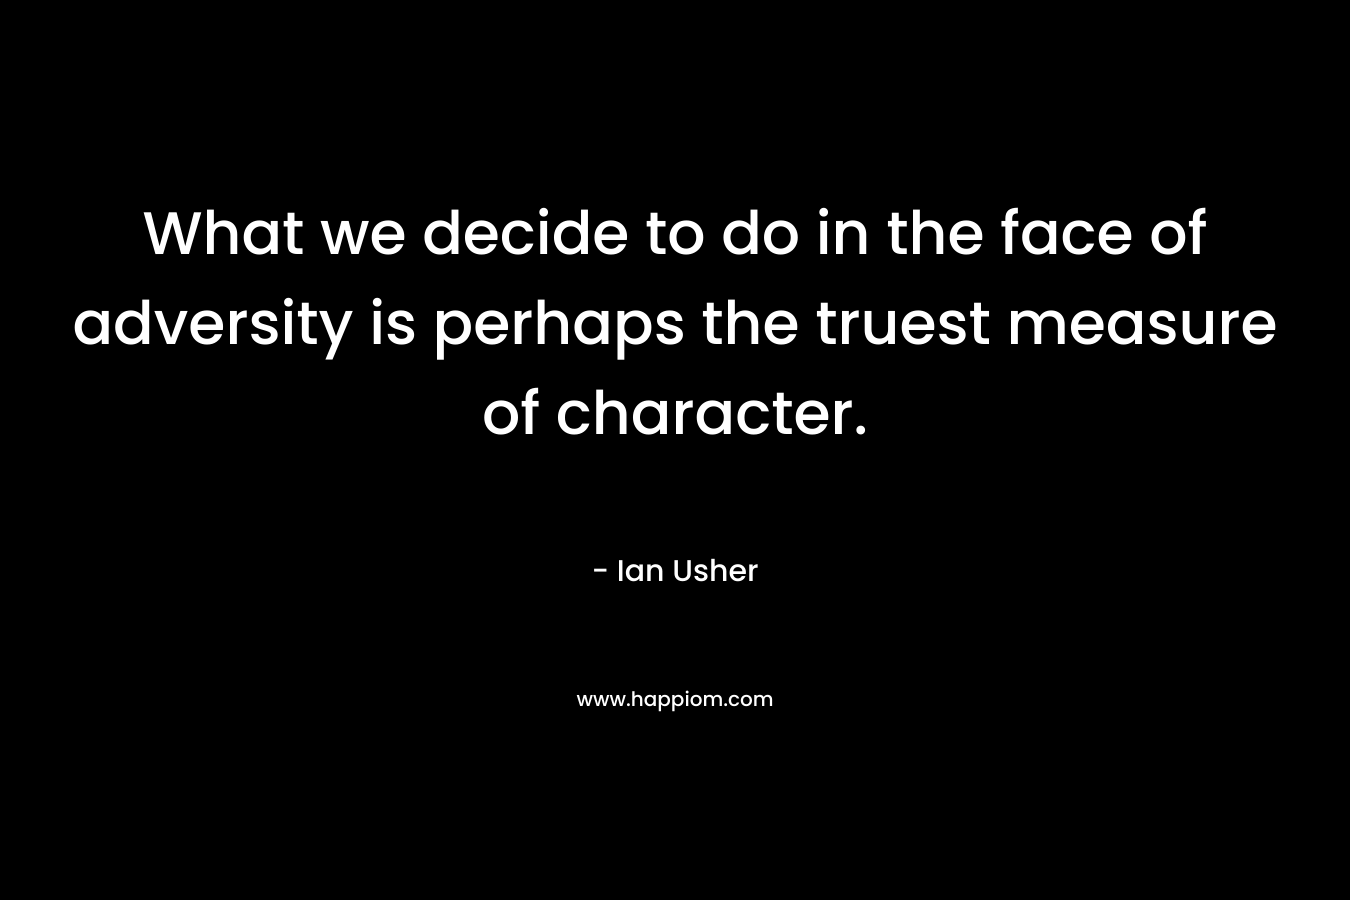 What we decide to do in the face of adversity is perhaps the truest measure of character. – Ian Usher